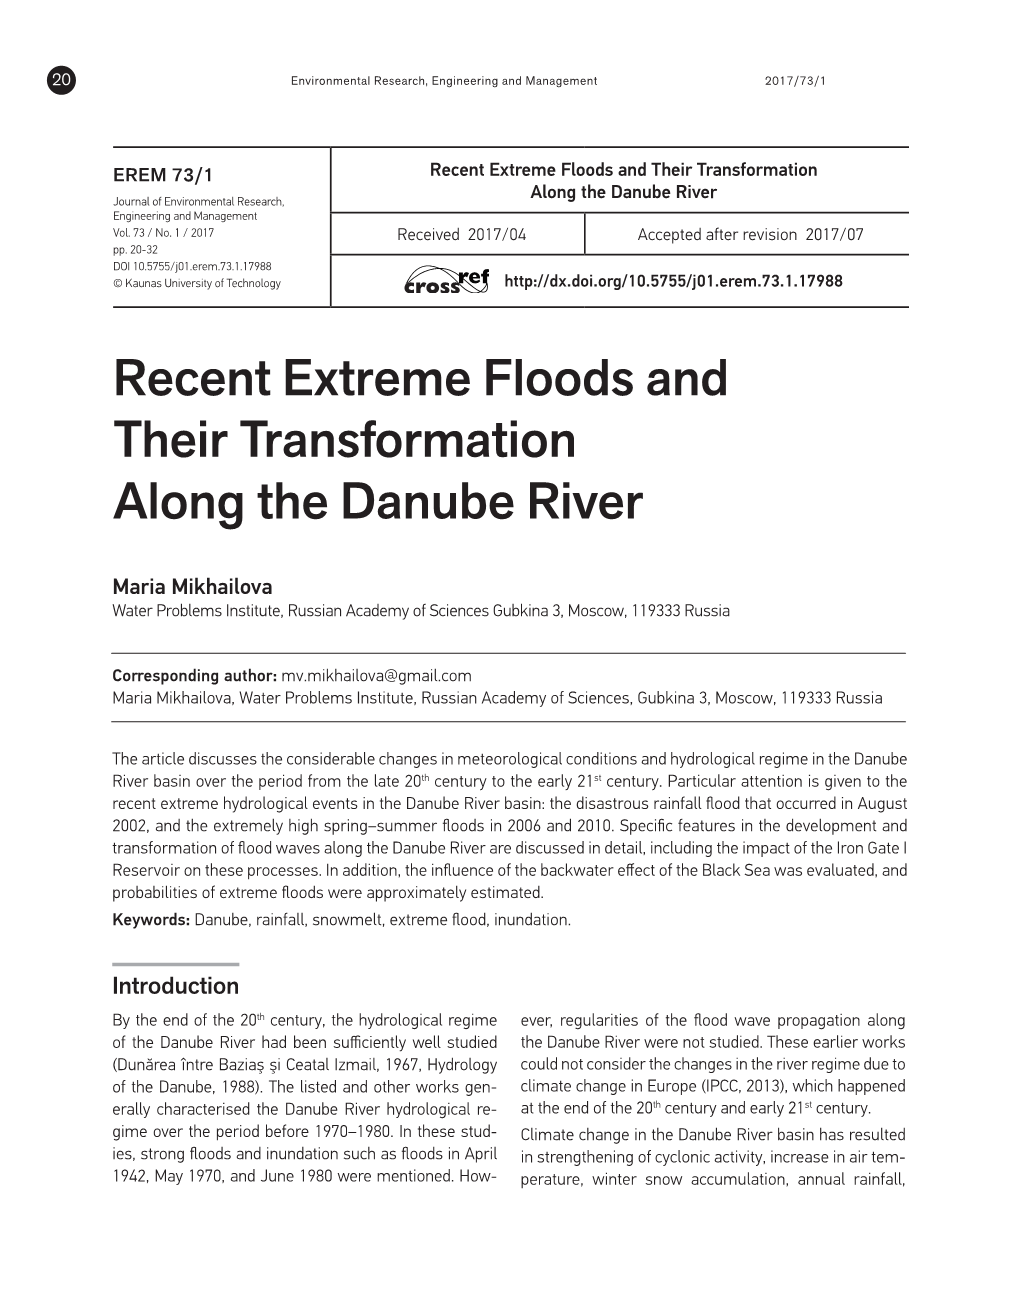 Recent Extreme Floods and Their Transformation Along the Danube River